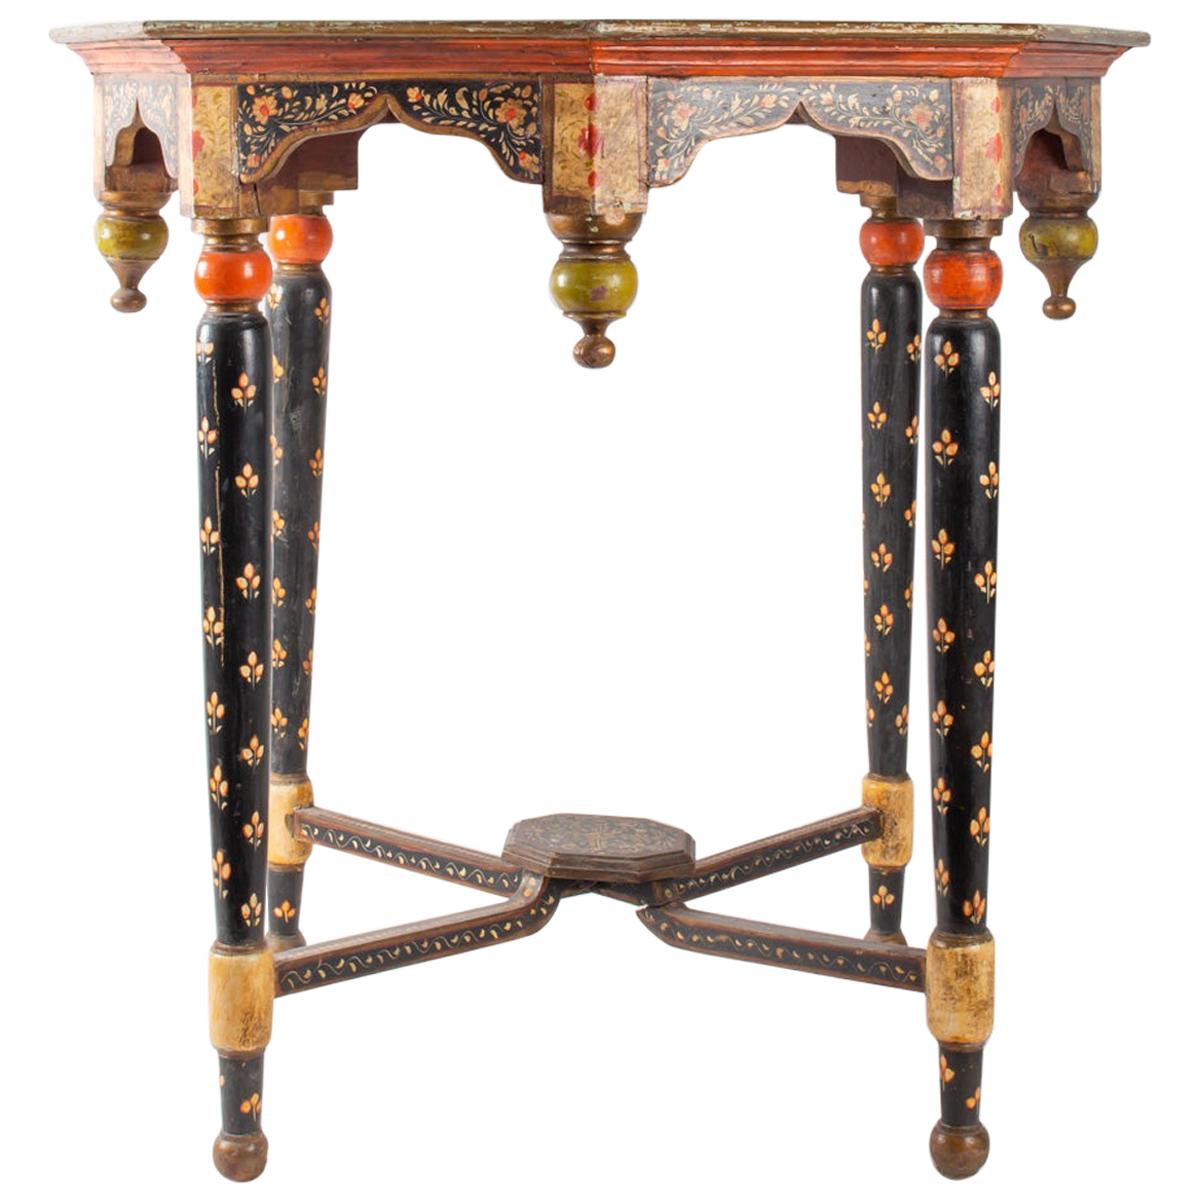 Octagonal Table in Polychrome Wood, North India, 1900